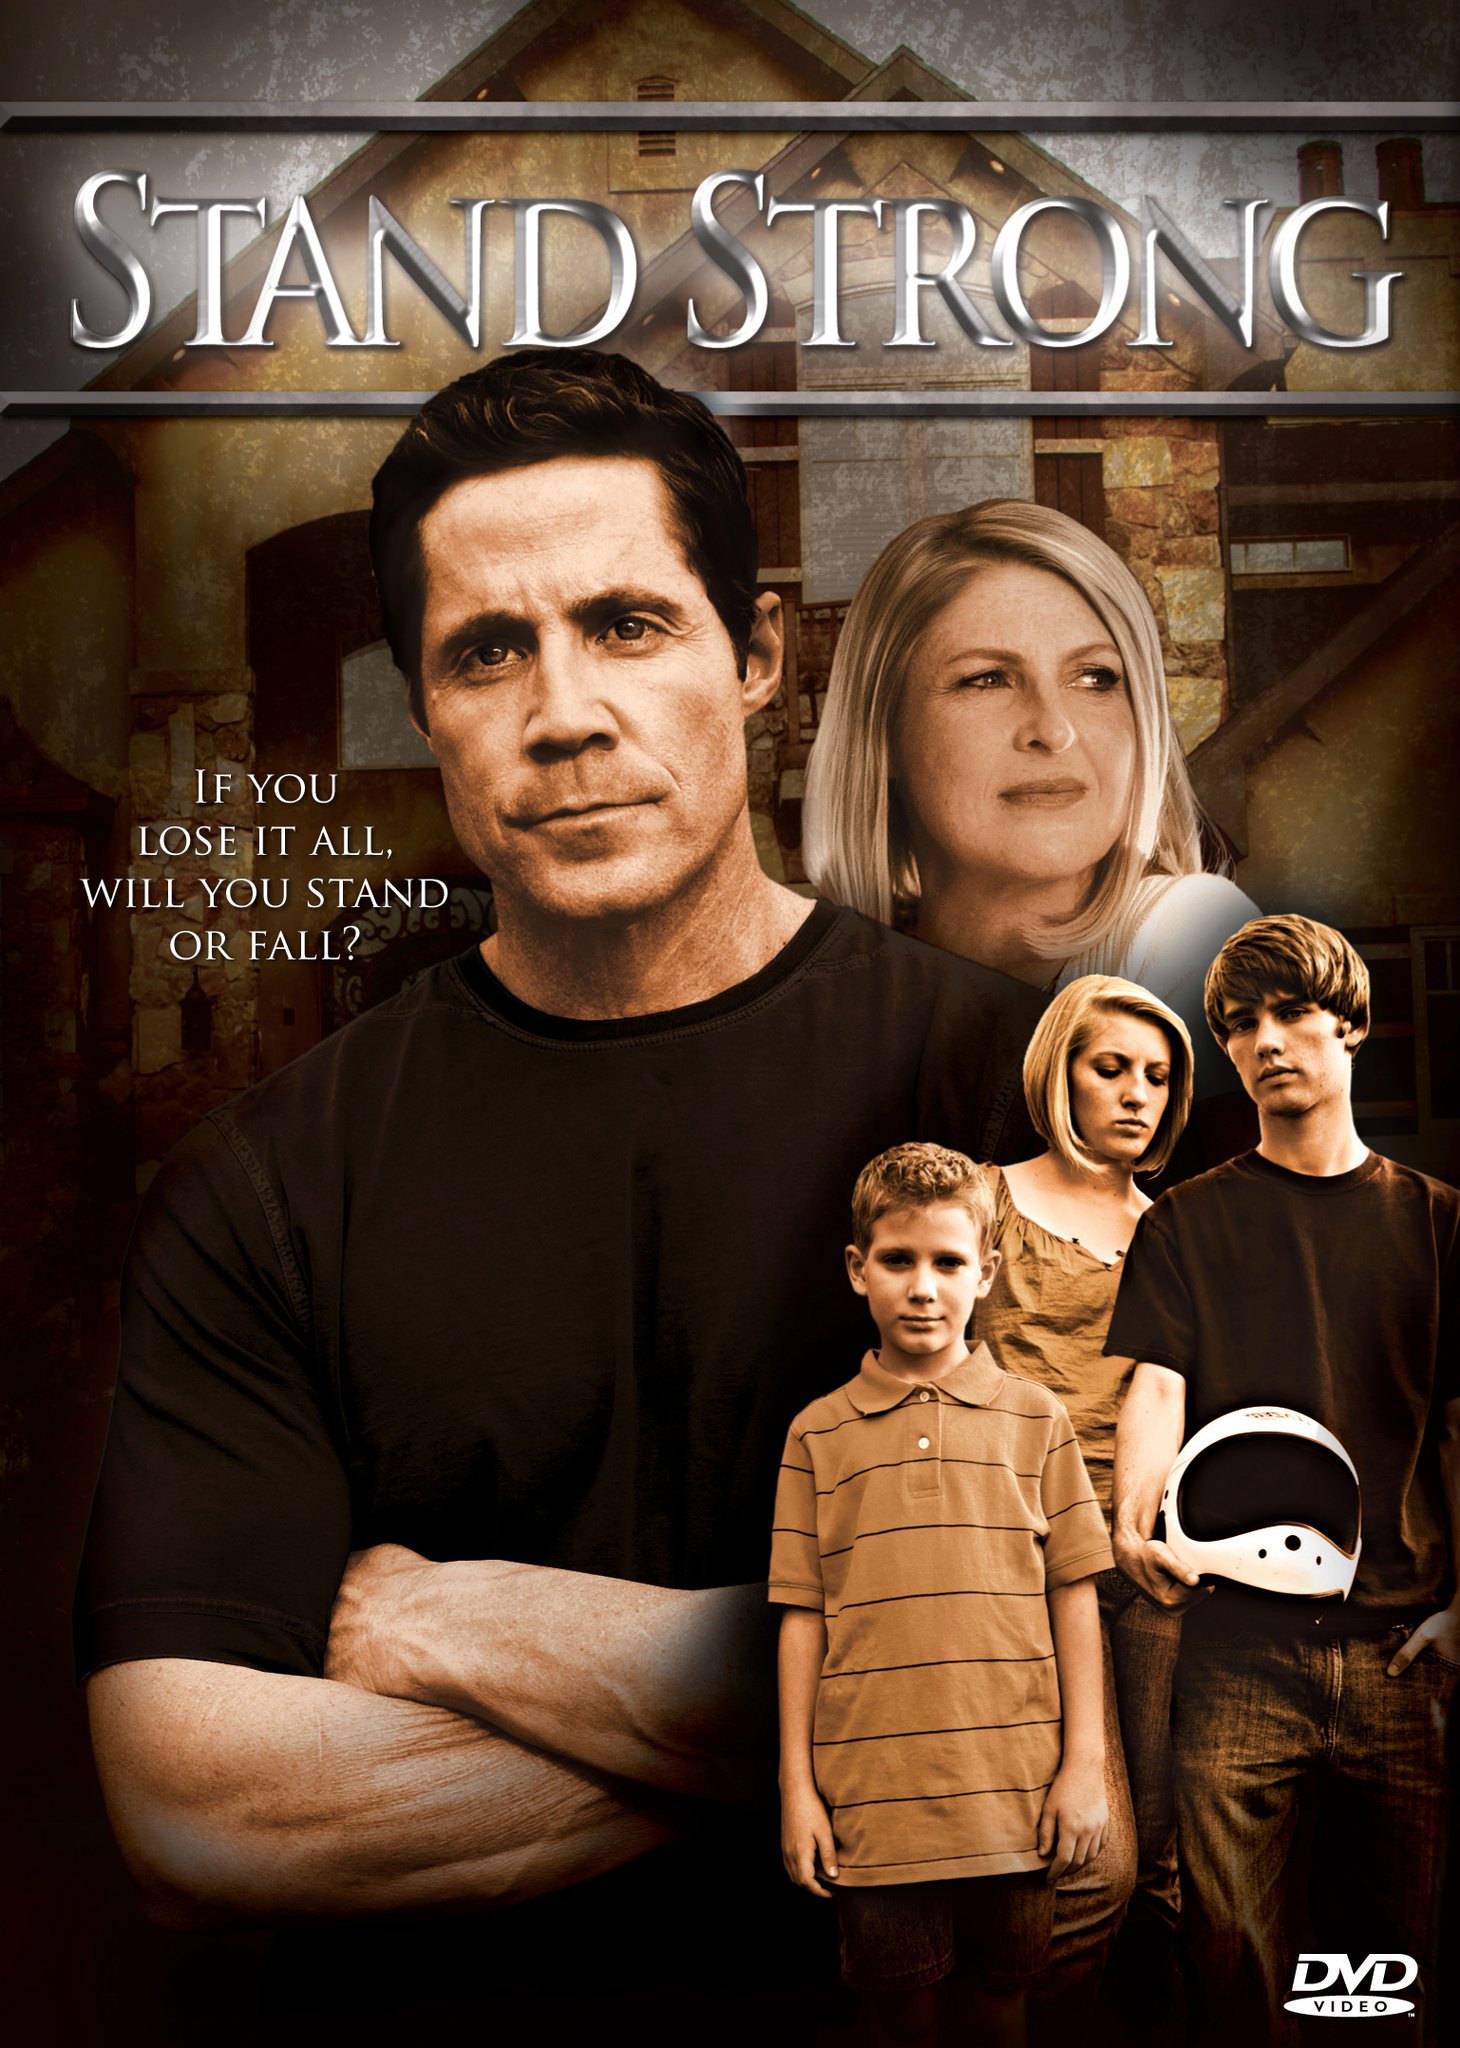 DVD Cover - Stand Strong